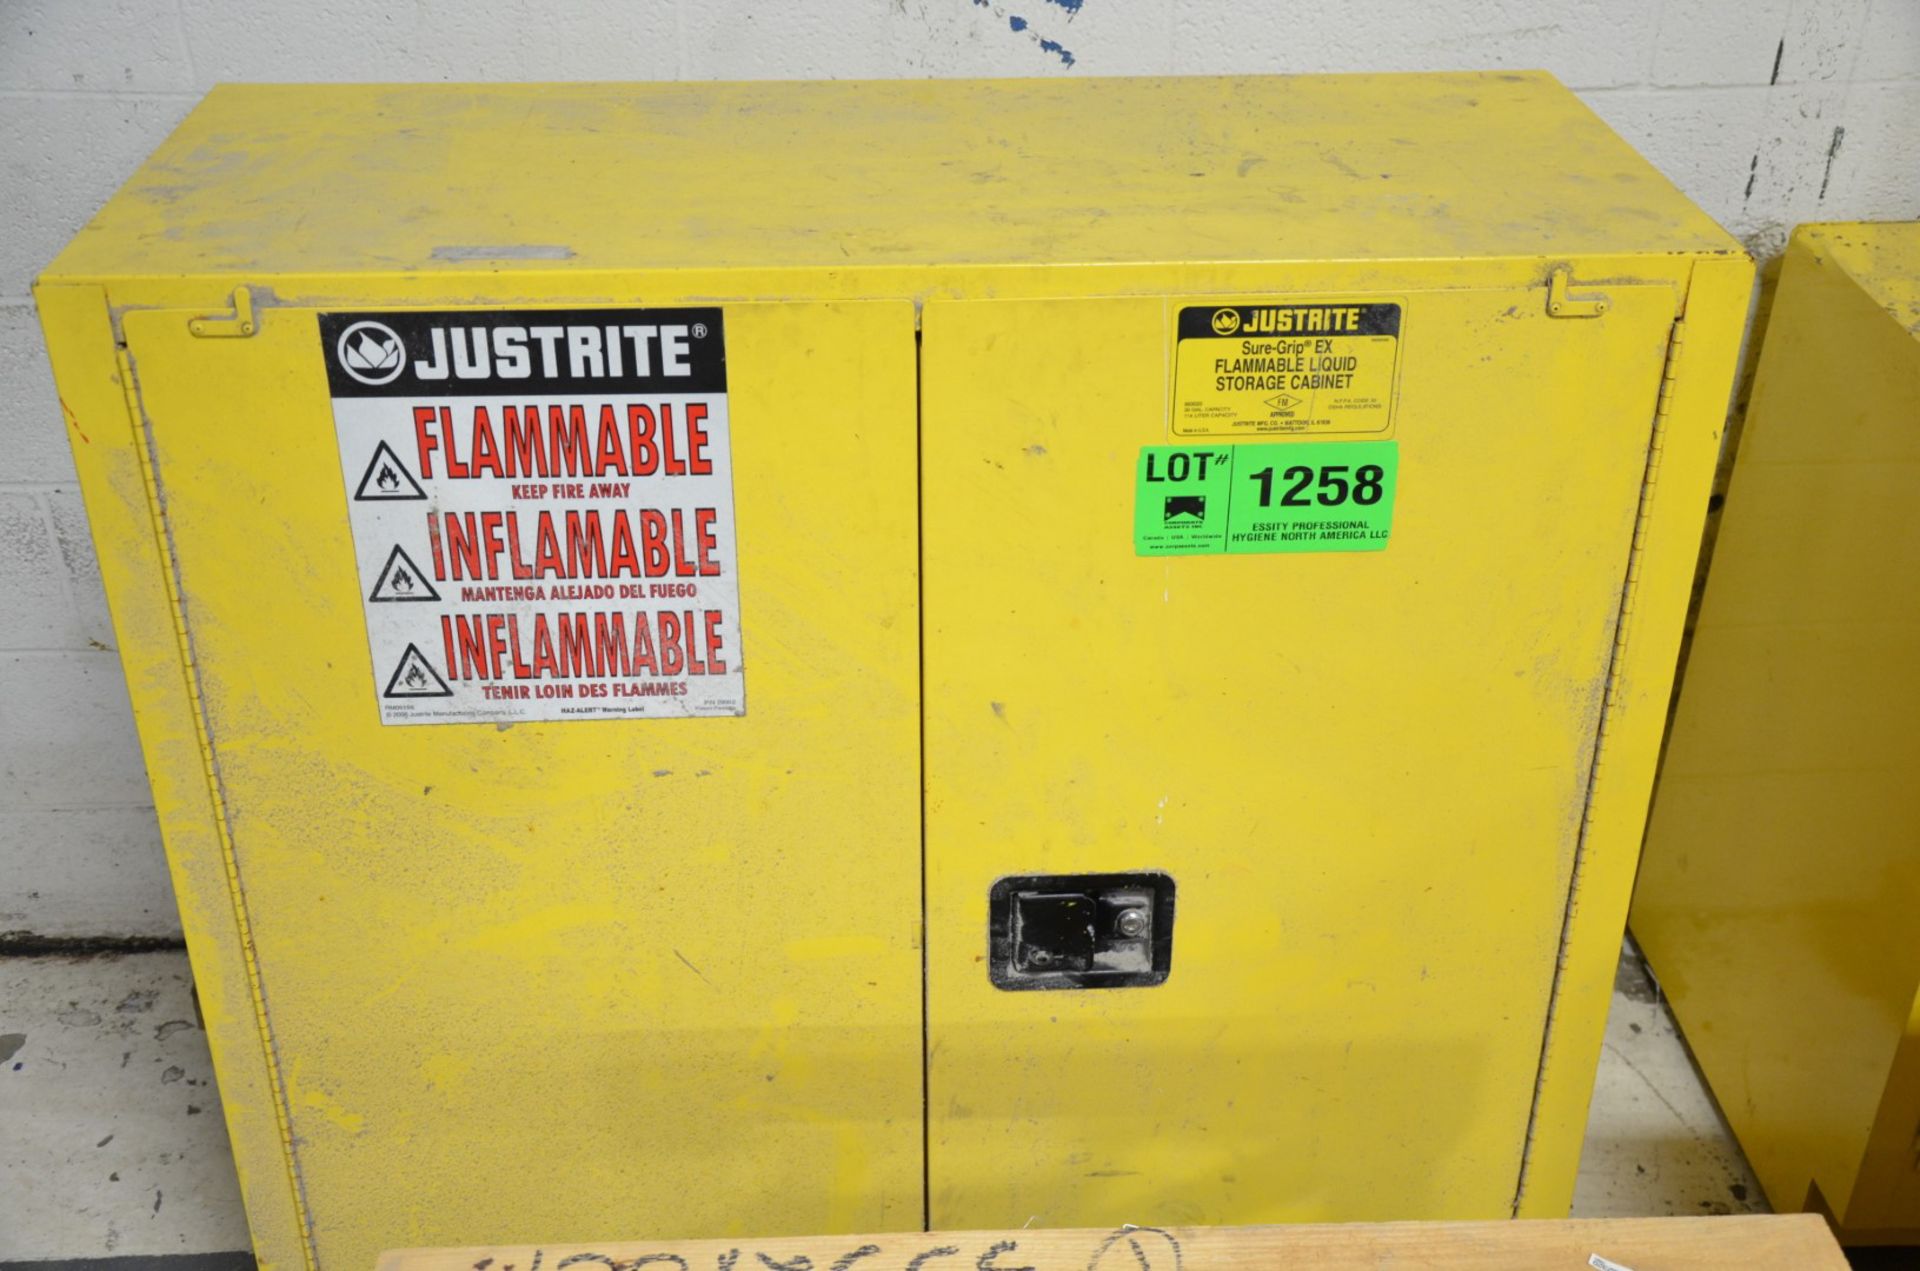 FLAMMABLE FIRE PROOF CABINET [RIGGING FEE FOR LOT #1258 - $25 USD PLUS APPLICABLE TAXES]